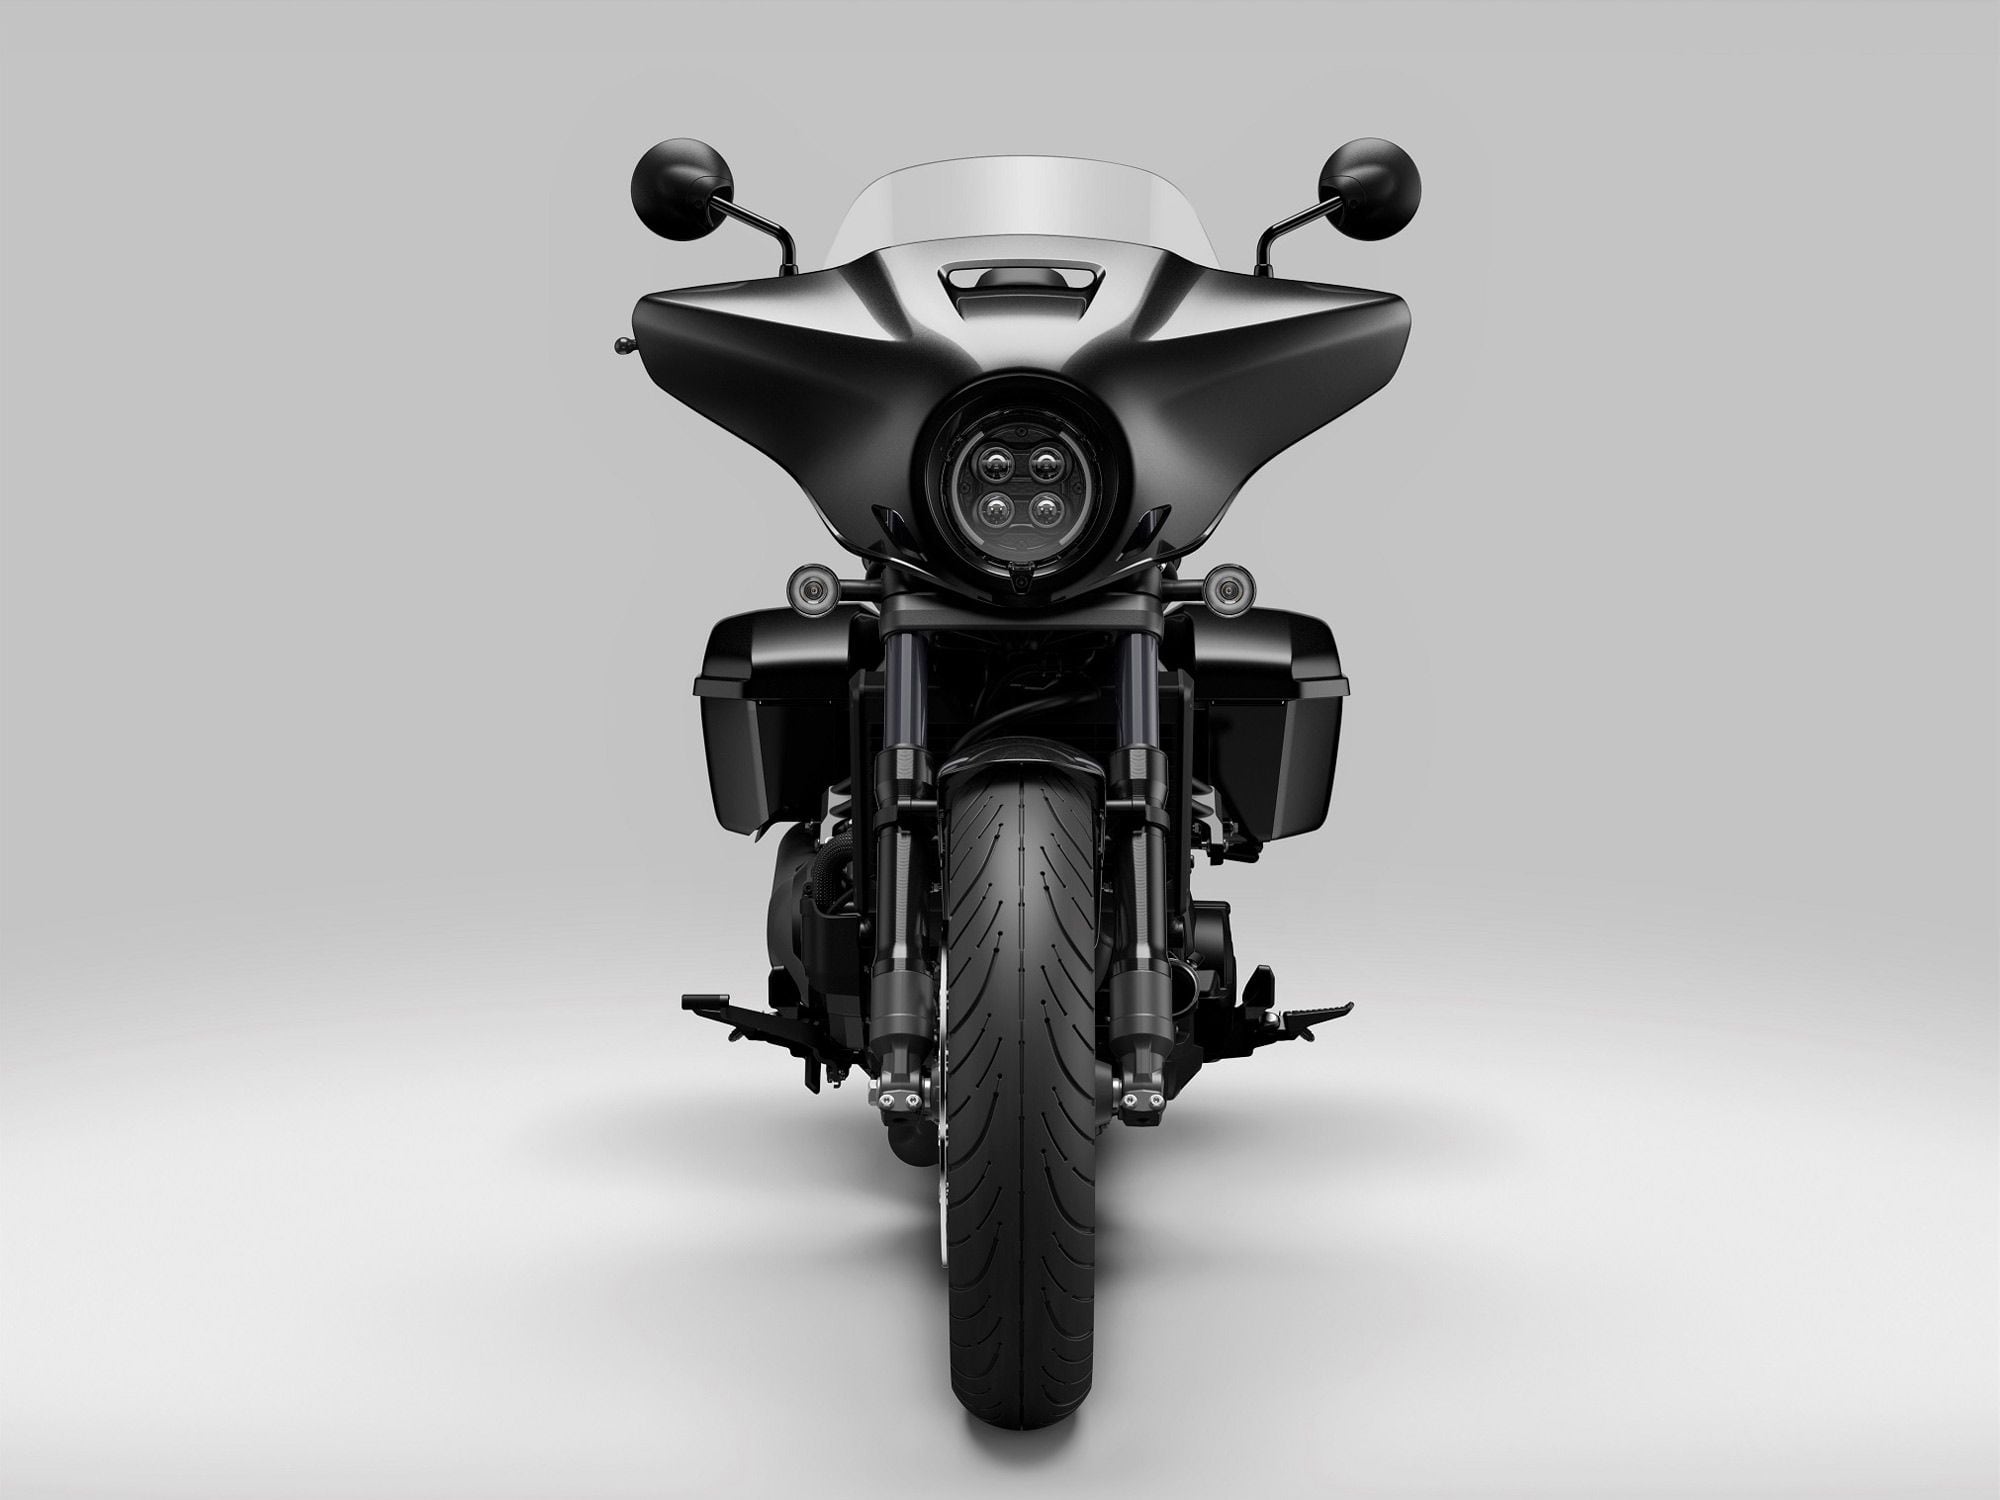 LED lighting front and rear comes standard, as does ABS and cruise control. Saddlebags are top loading and lockable.